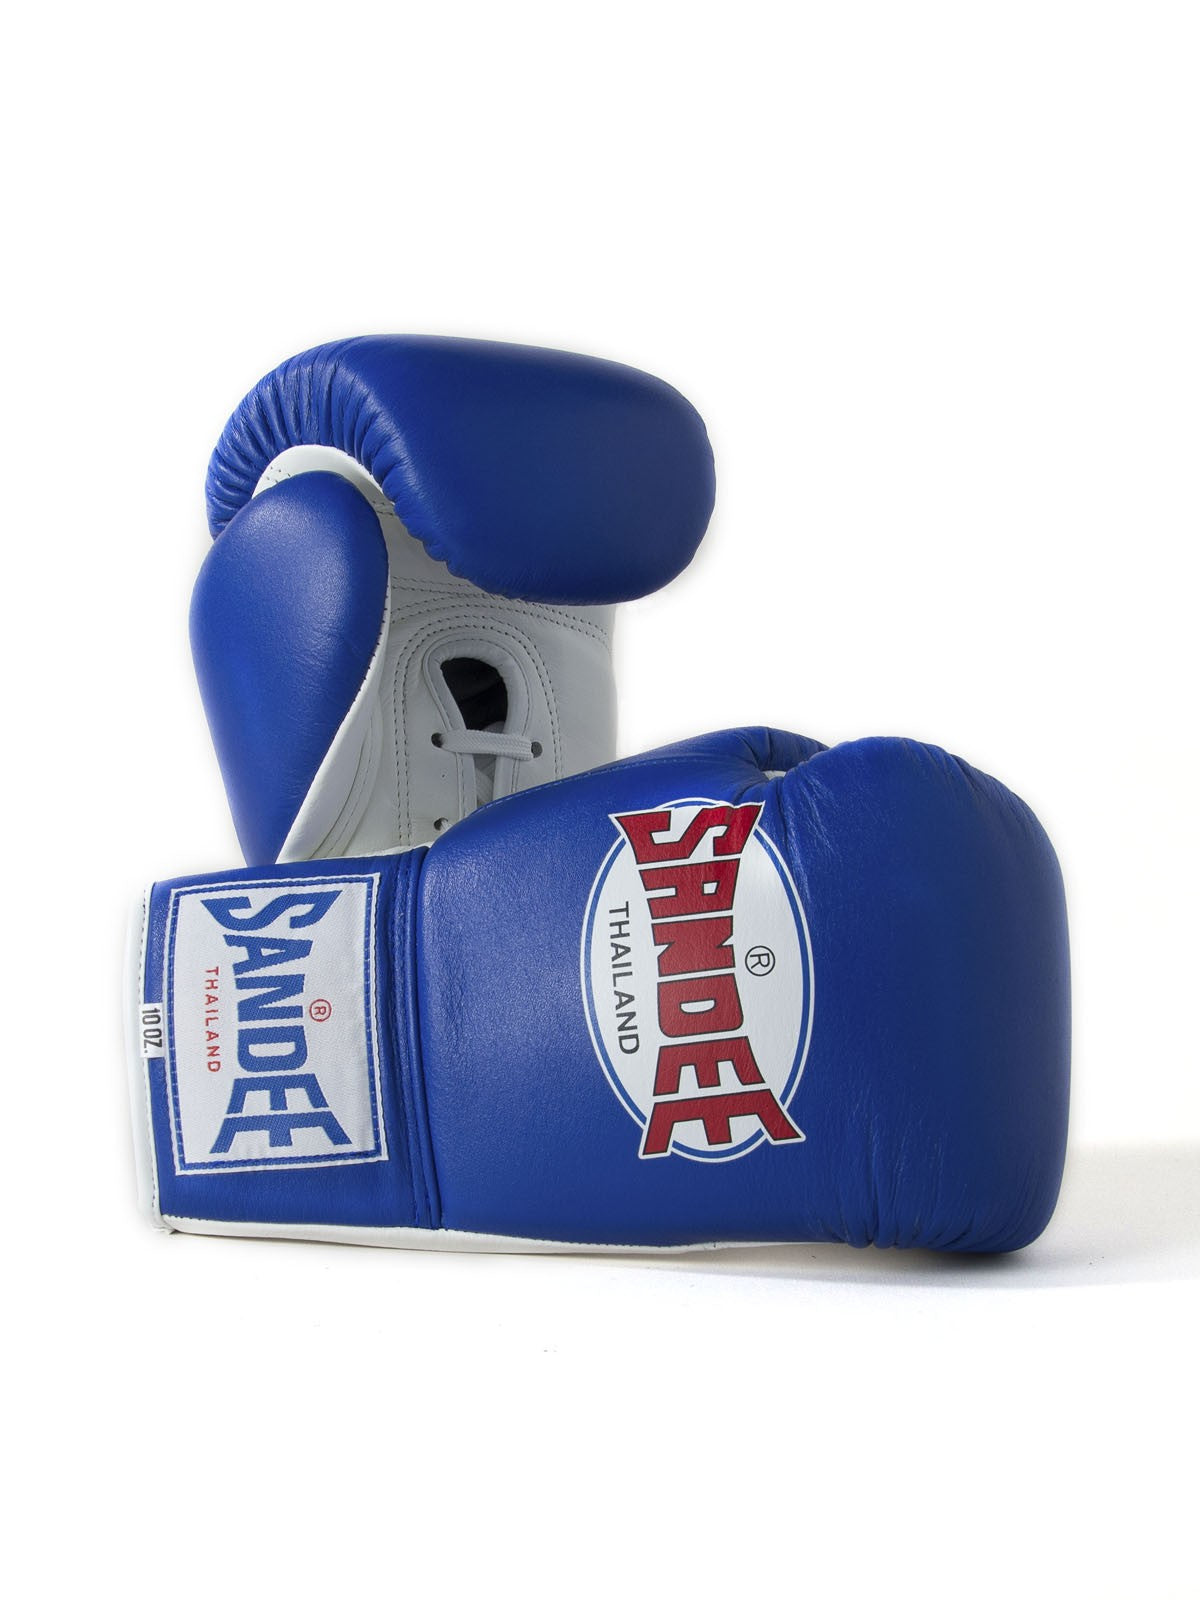 Sandee Lace Up Pro Fight Boxing Gloves